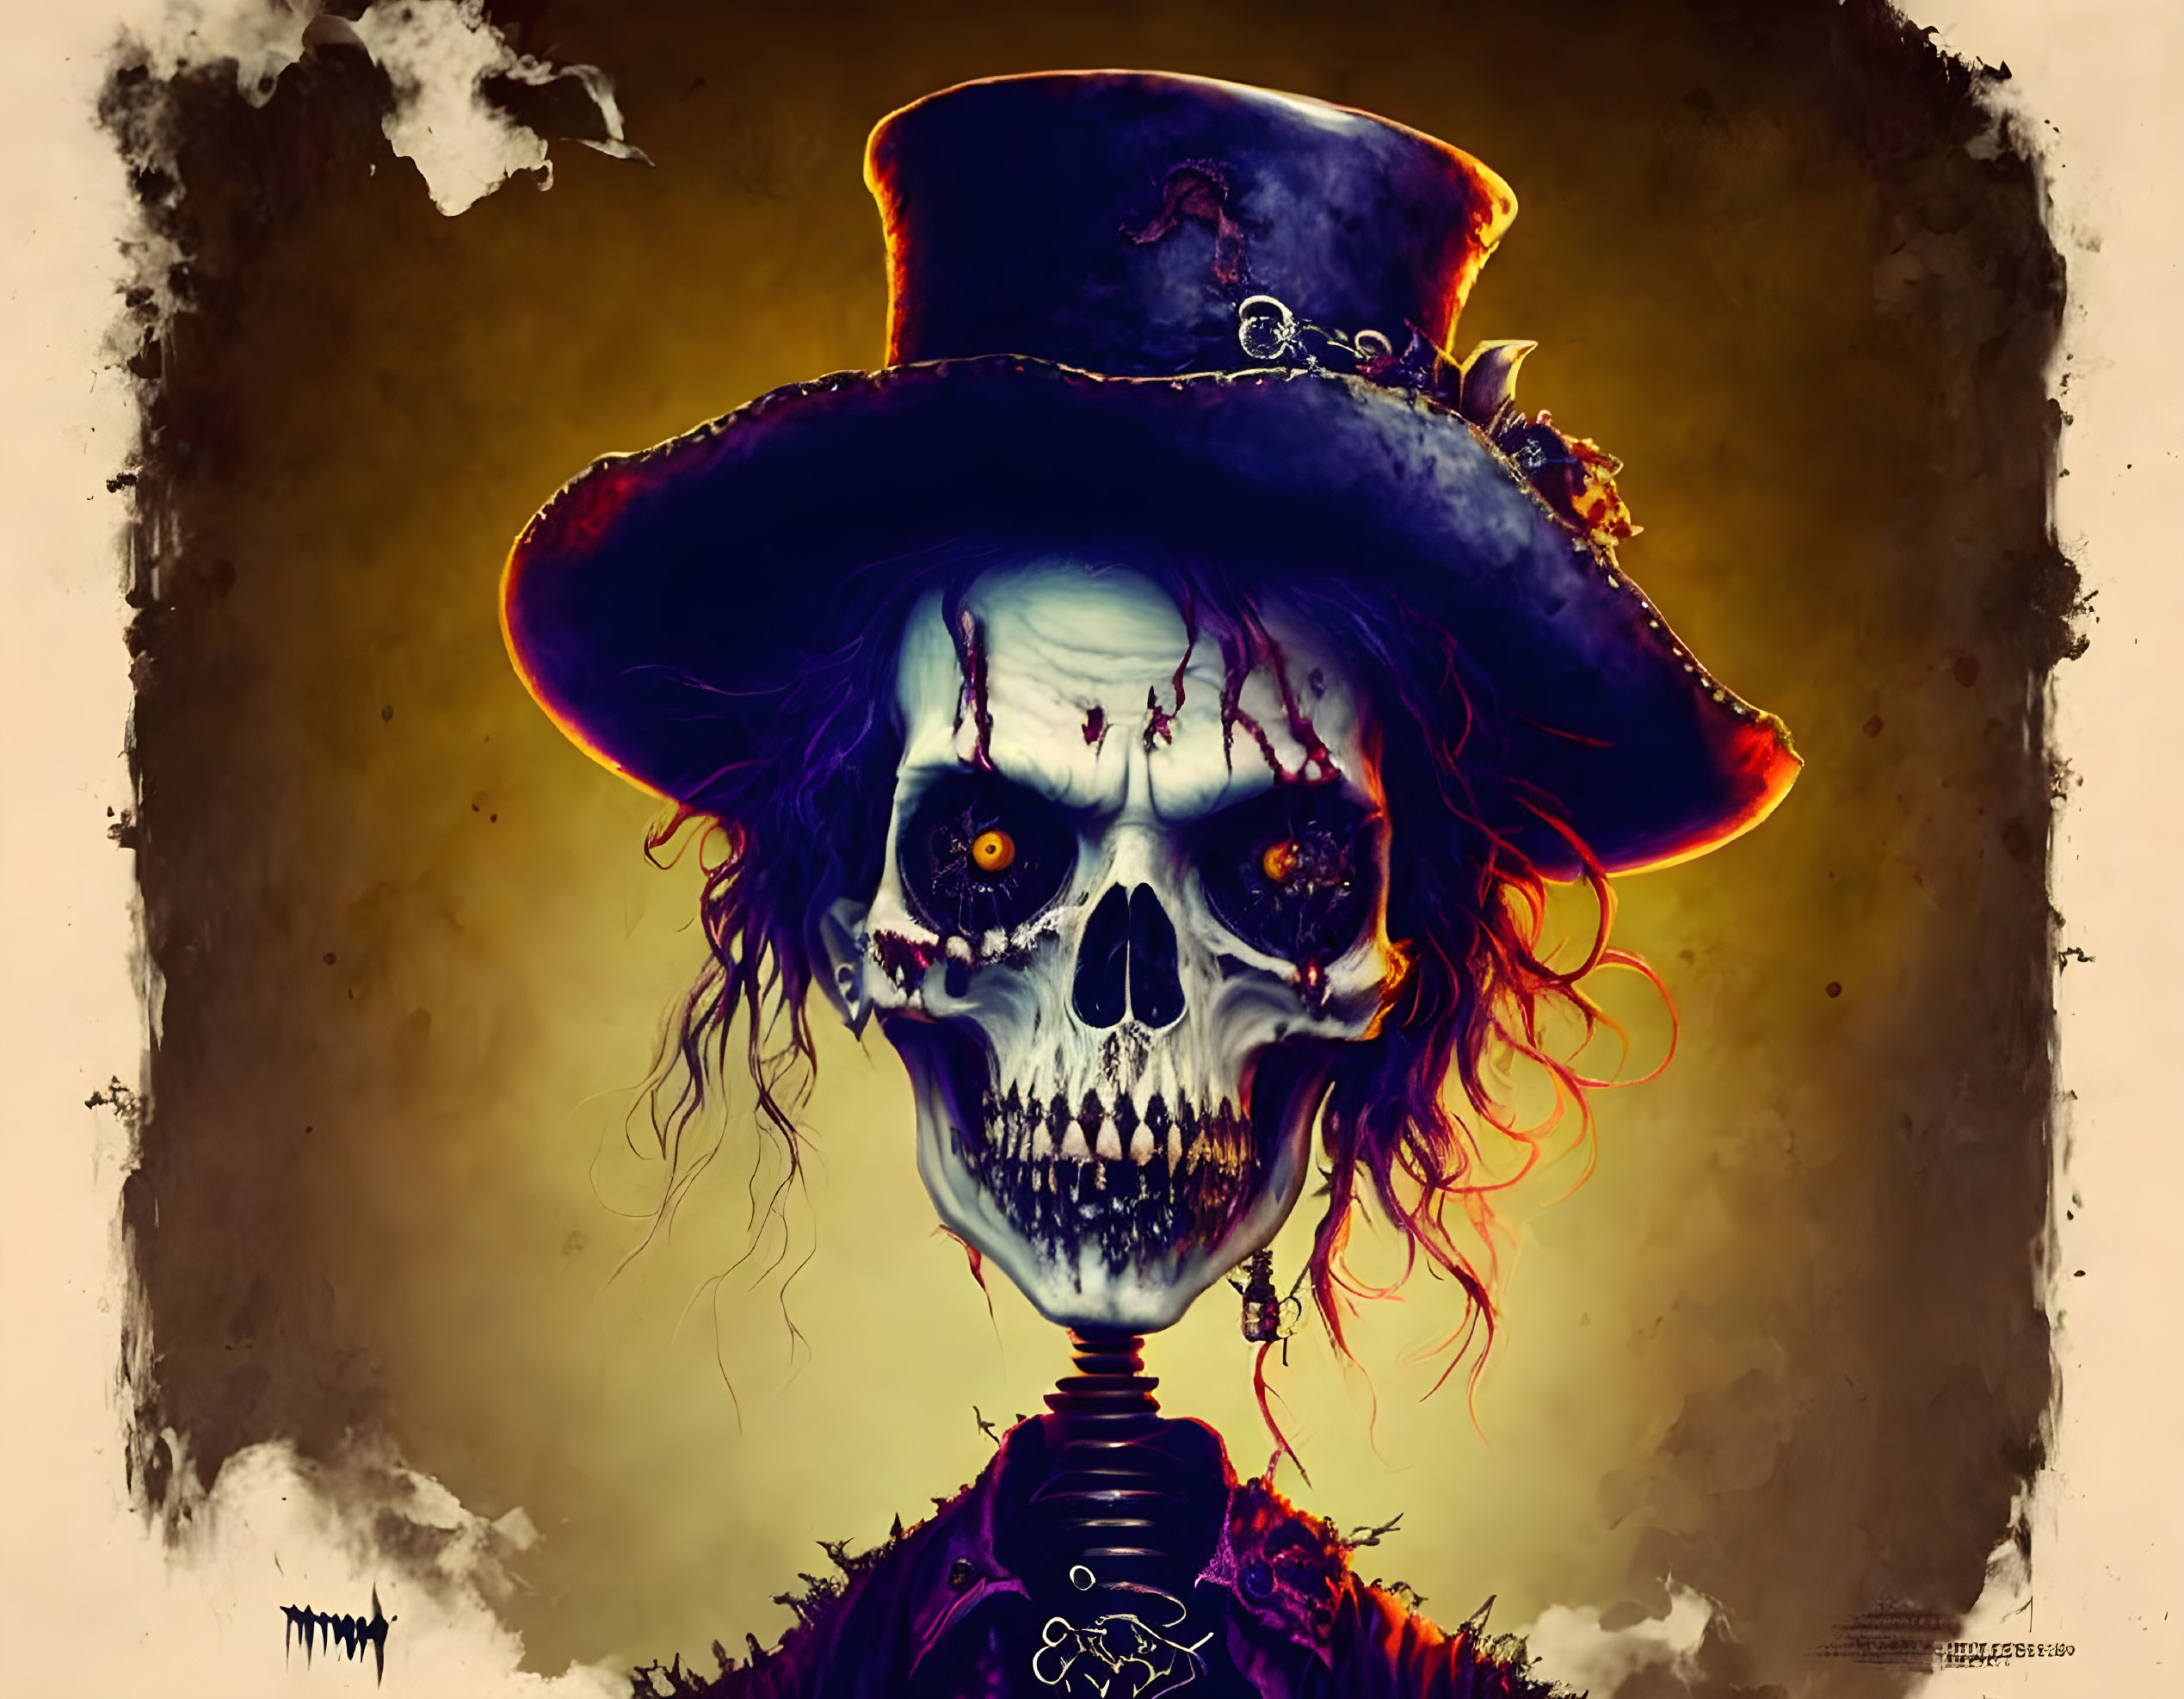 Skull with vibrant highlights in tattered top hat with feathers and chains